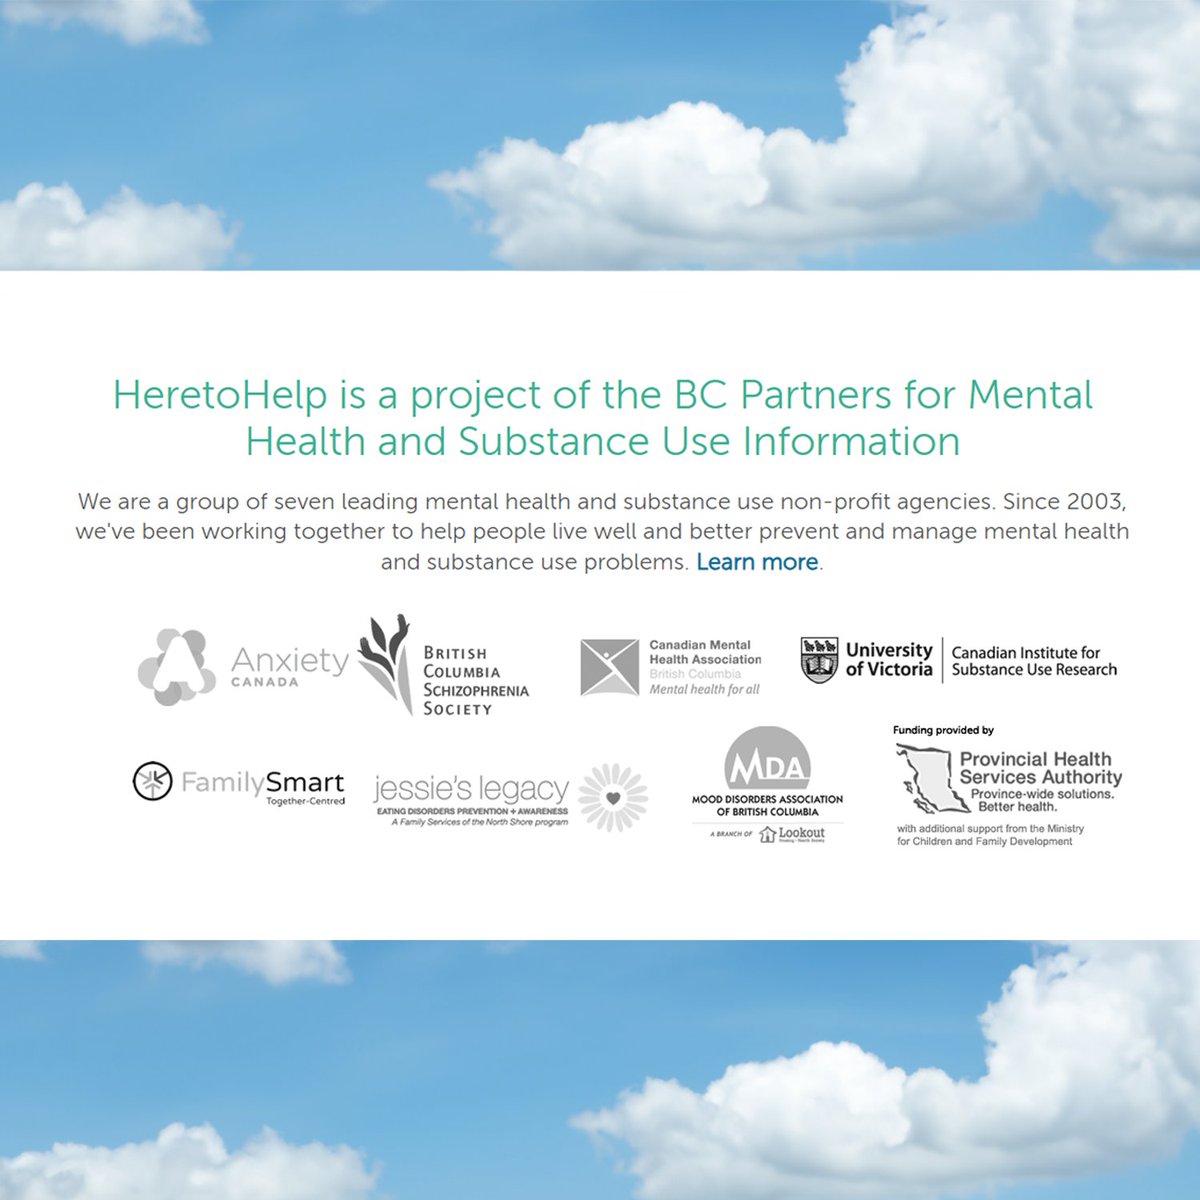 Mood Disorders Association of BC, a branch of Lookout, is a proud member of a group of seven provincial mental health and substance use non-profits working together to help British Columbians improve their mental well-being by advancing mental health and substance use literacy.